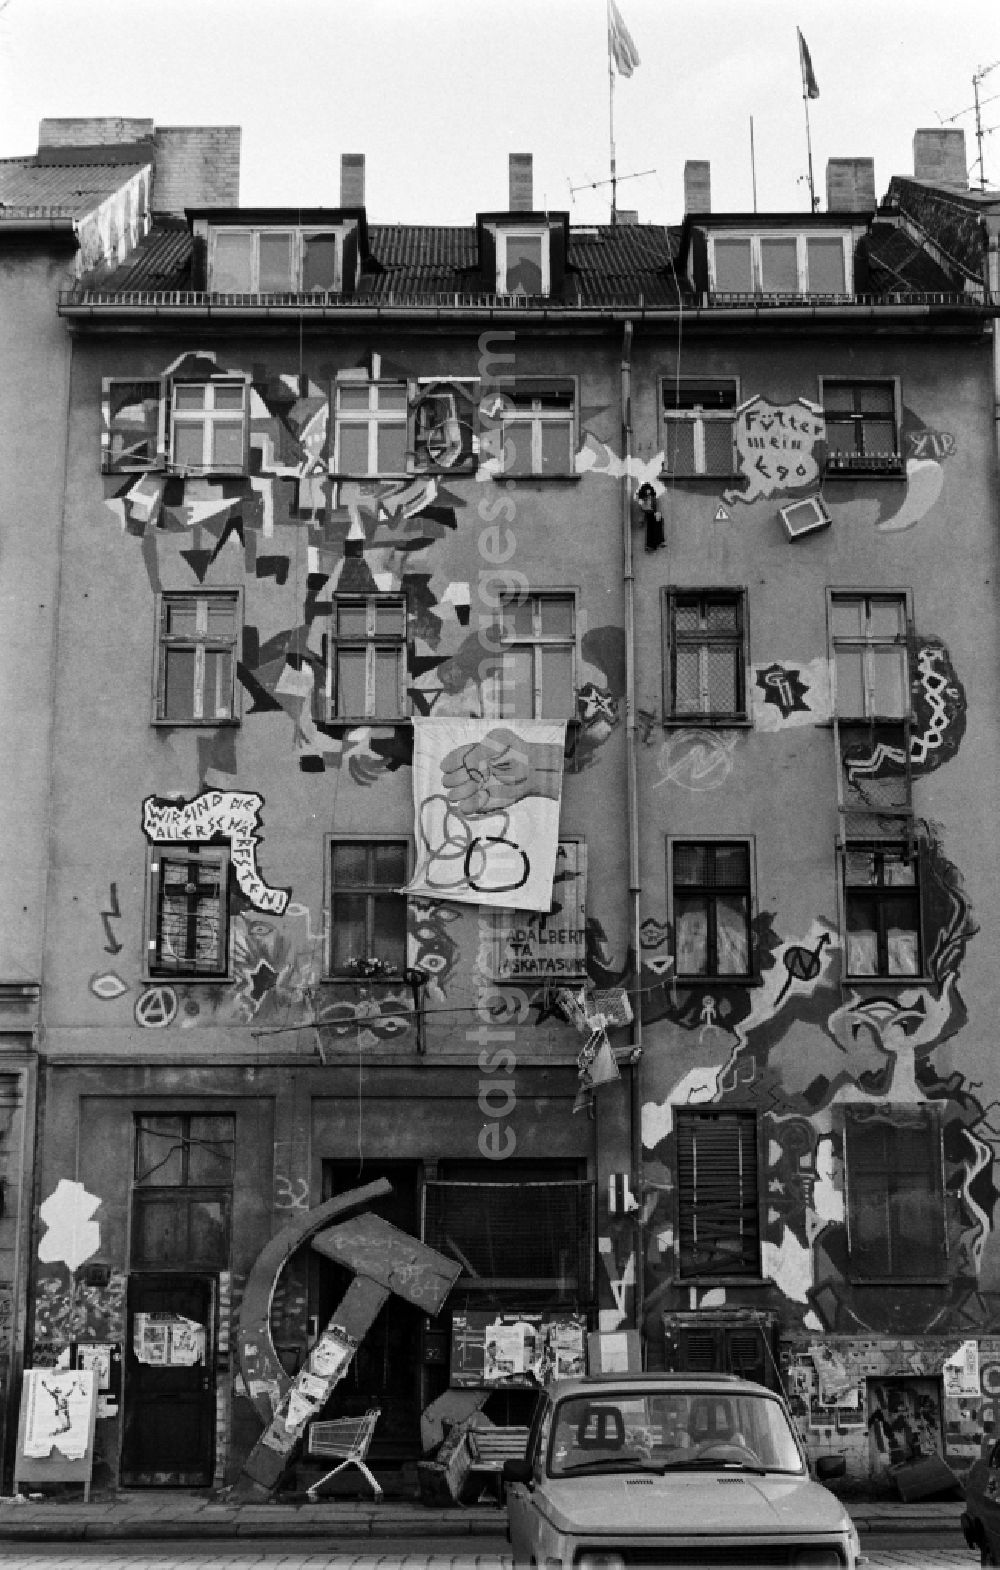 GDR picture archive: Berlin - The occupied house in the Adalbertstrasse in Berlin - Mitte, the former capital of the GDR, German Democratic Republic